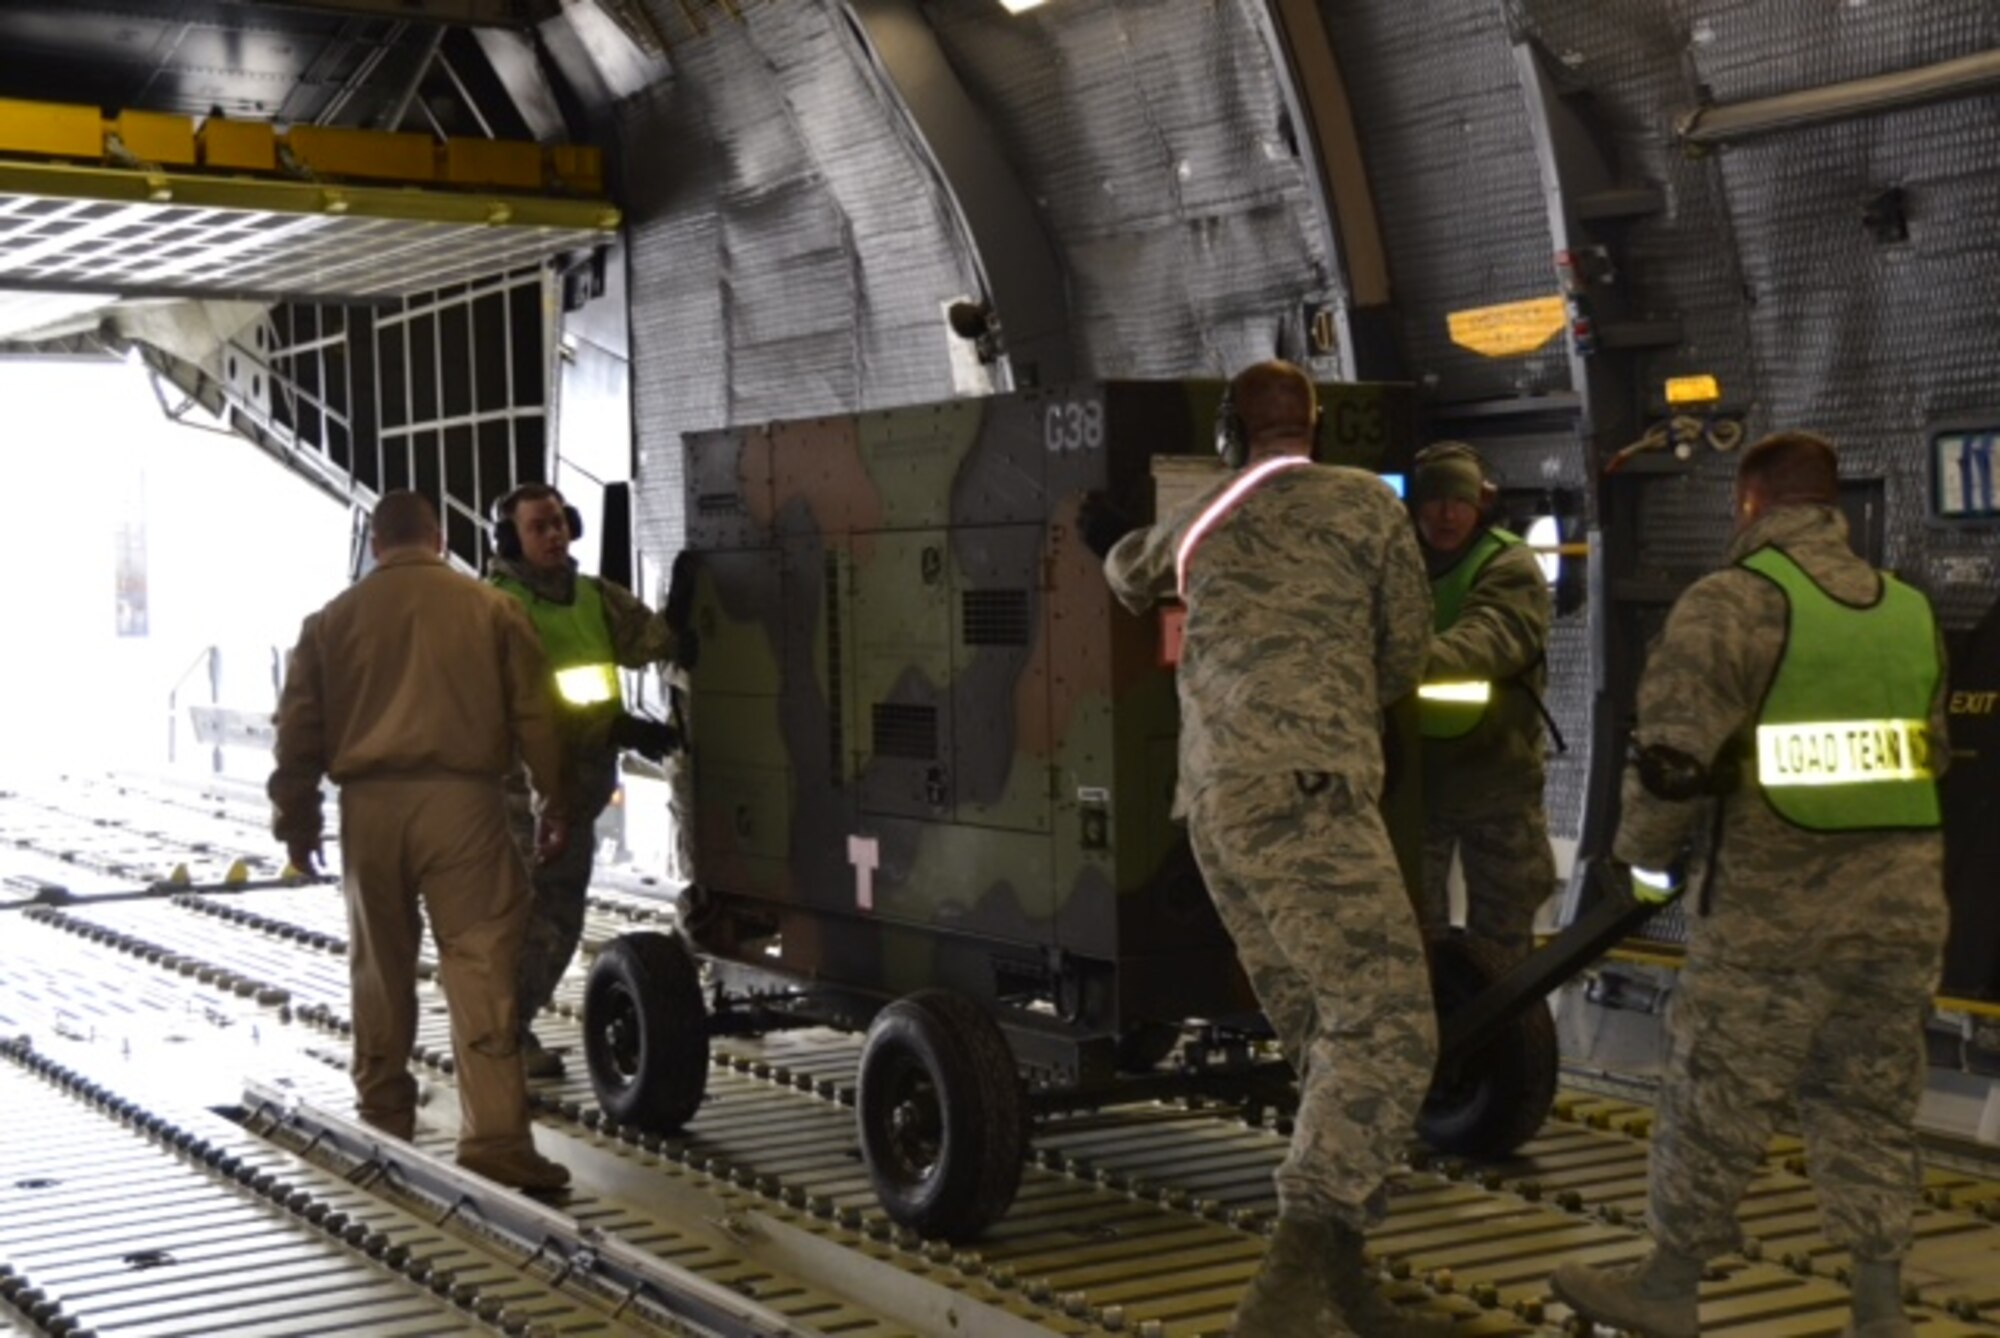 Airmen load cargo onto an aircraft in preparation for the 174th Attack Wing's deployment from Hancock Field Air National Guard Base in January, 2016. (Courtesy photo/Released)